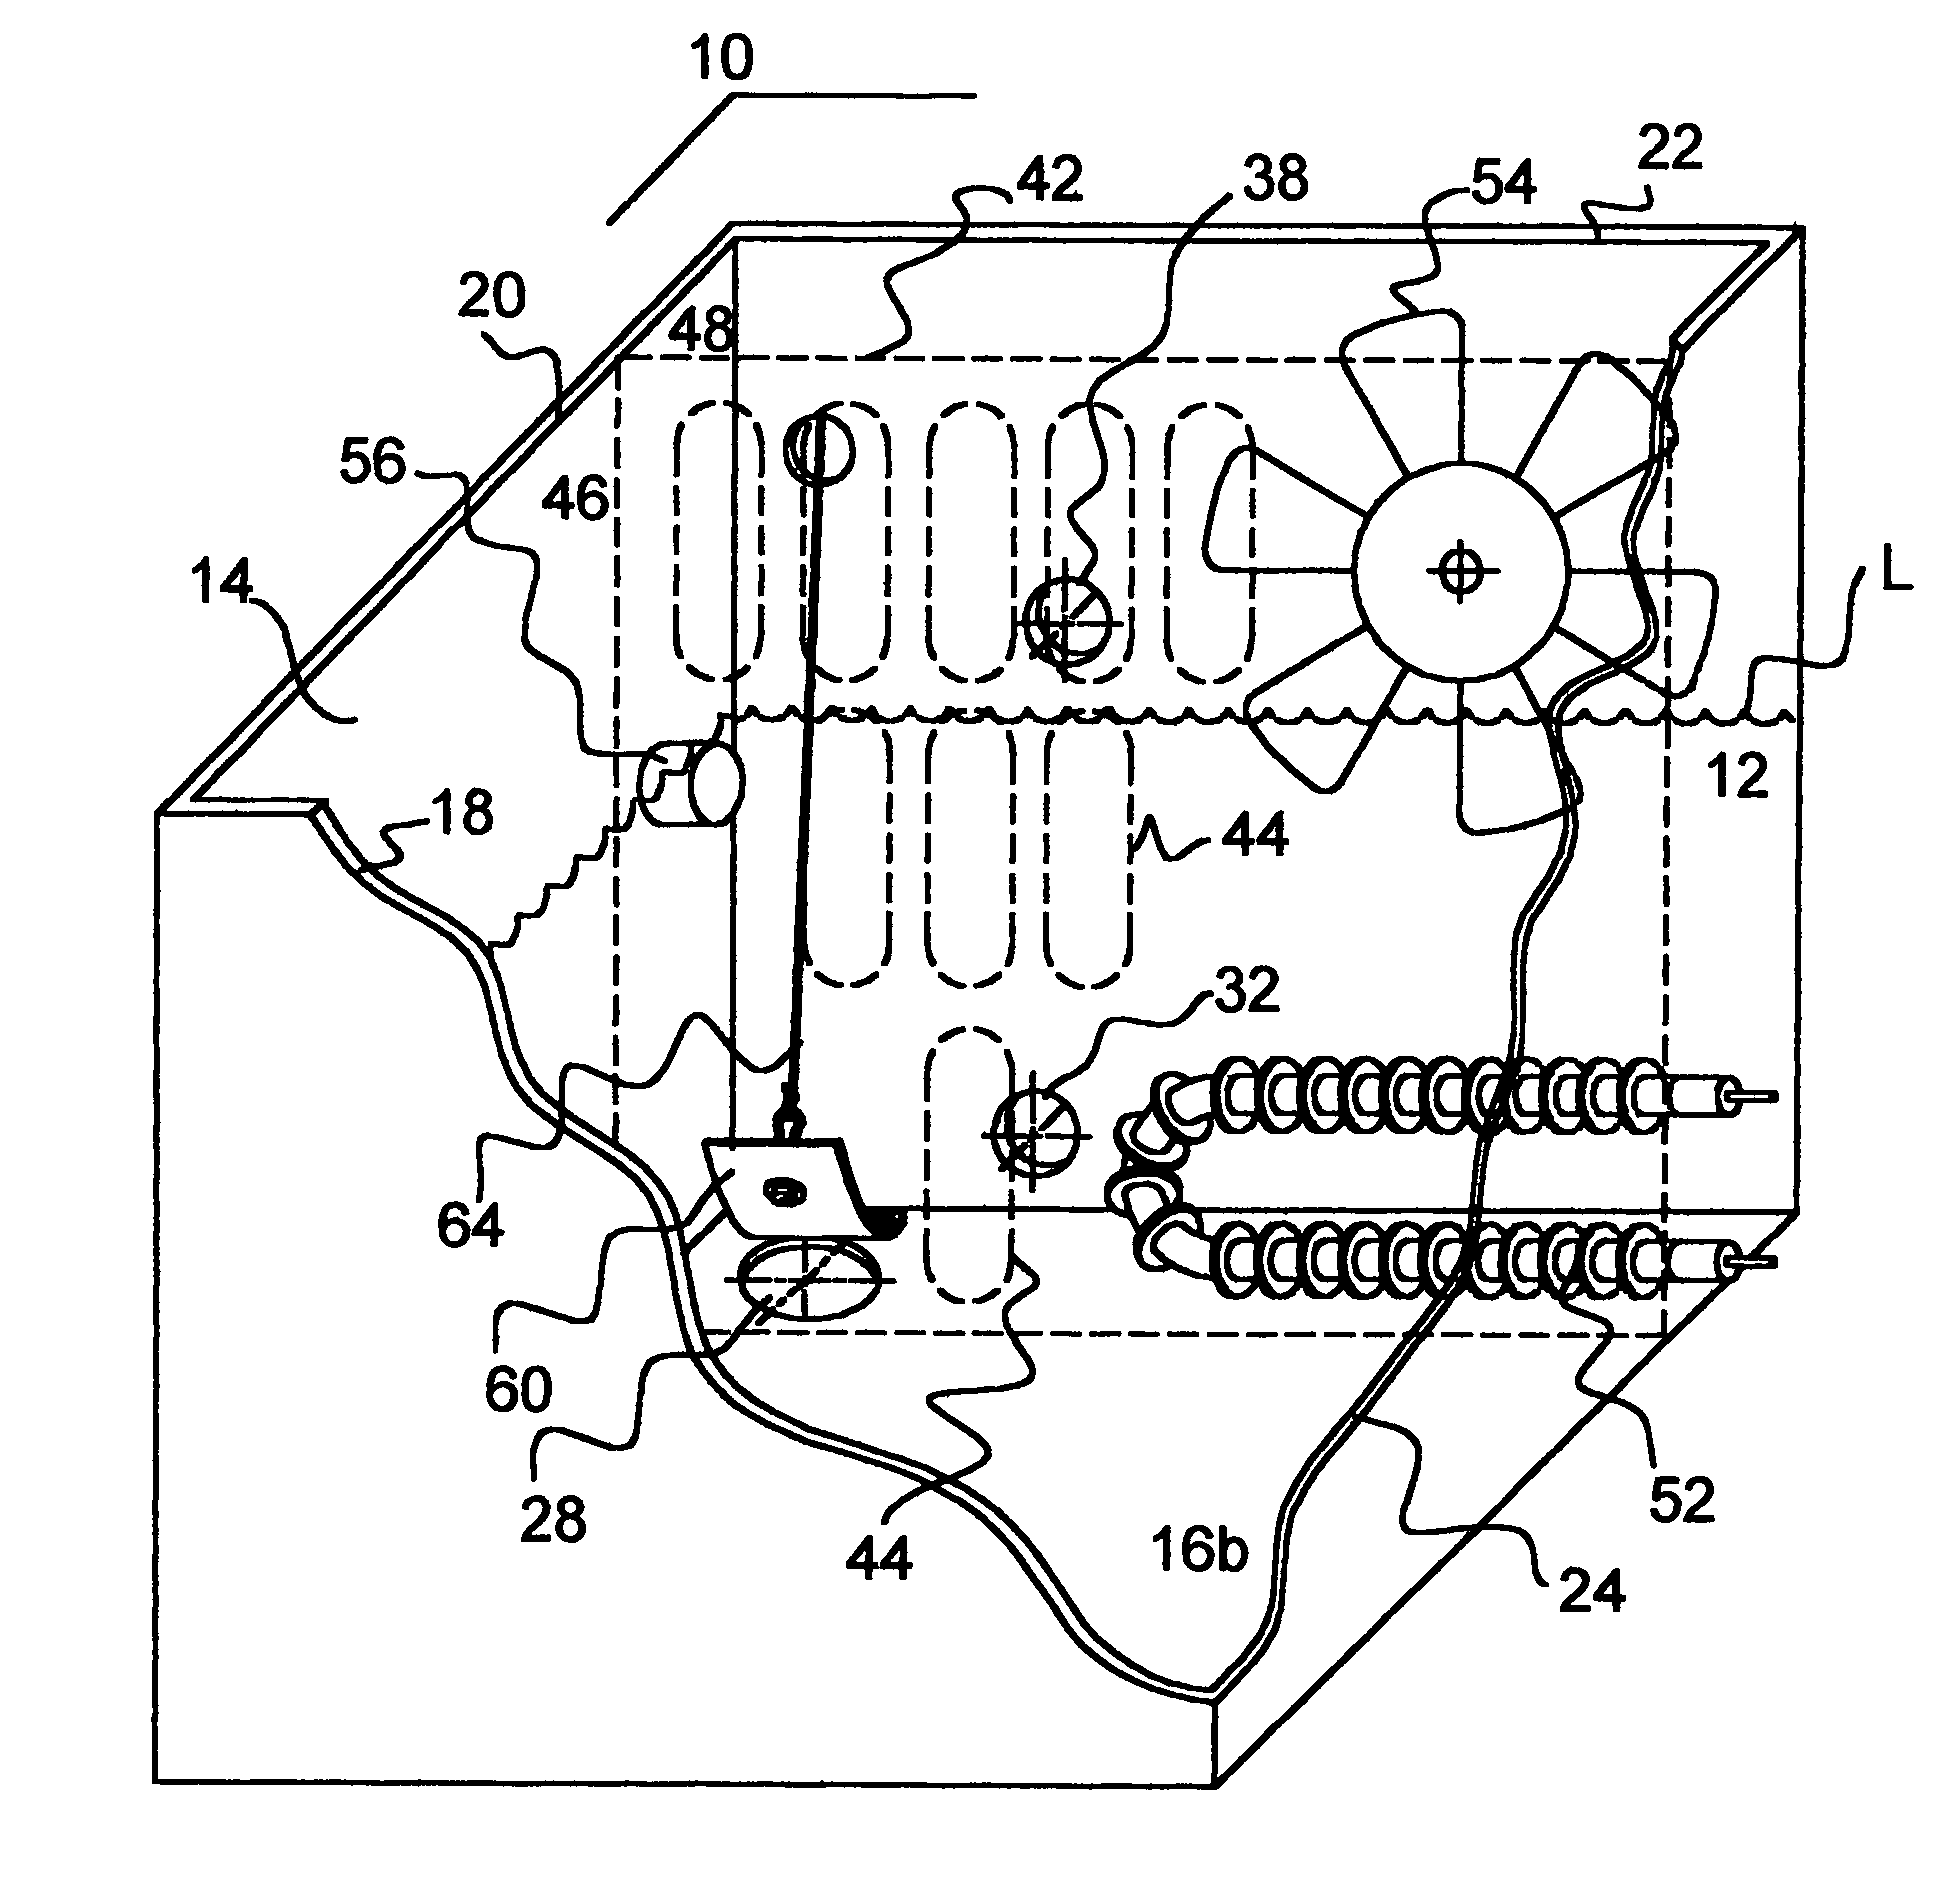 Automated ultrasonic cleaning apparatus with trigger means for draining fluid therefrom